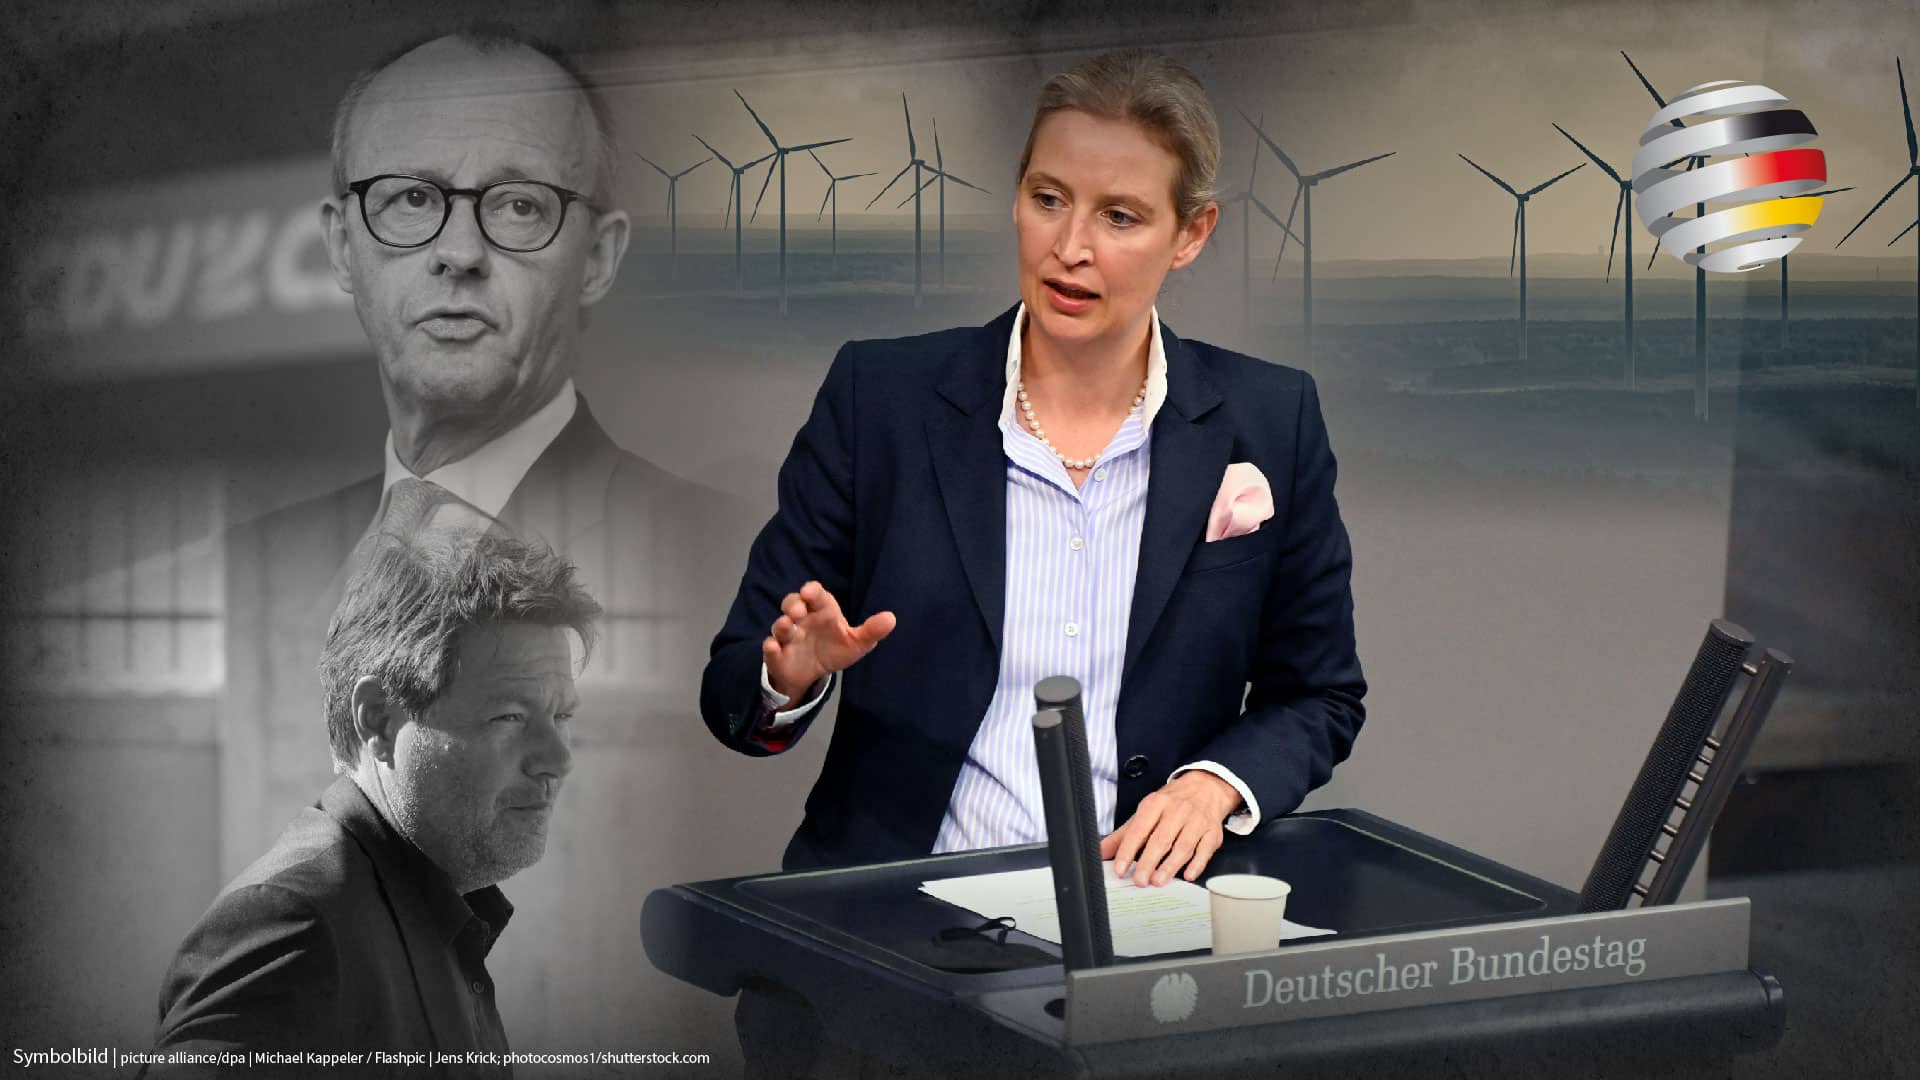 alice-weidel-(afd):-„the-green-wind-power-lobby-destroys-forests,-nature,-and-the-environment-–-and-the-cdu-is-participating!